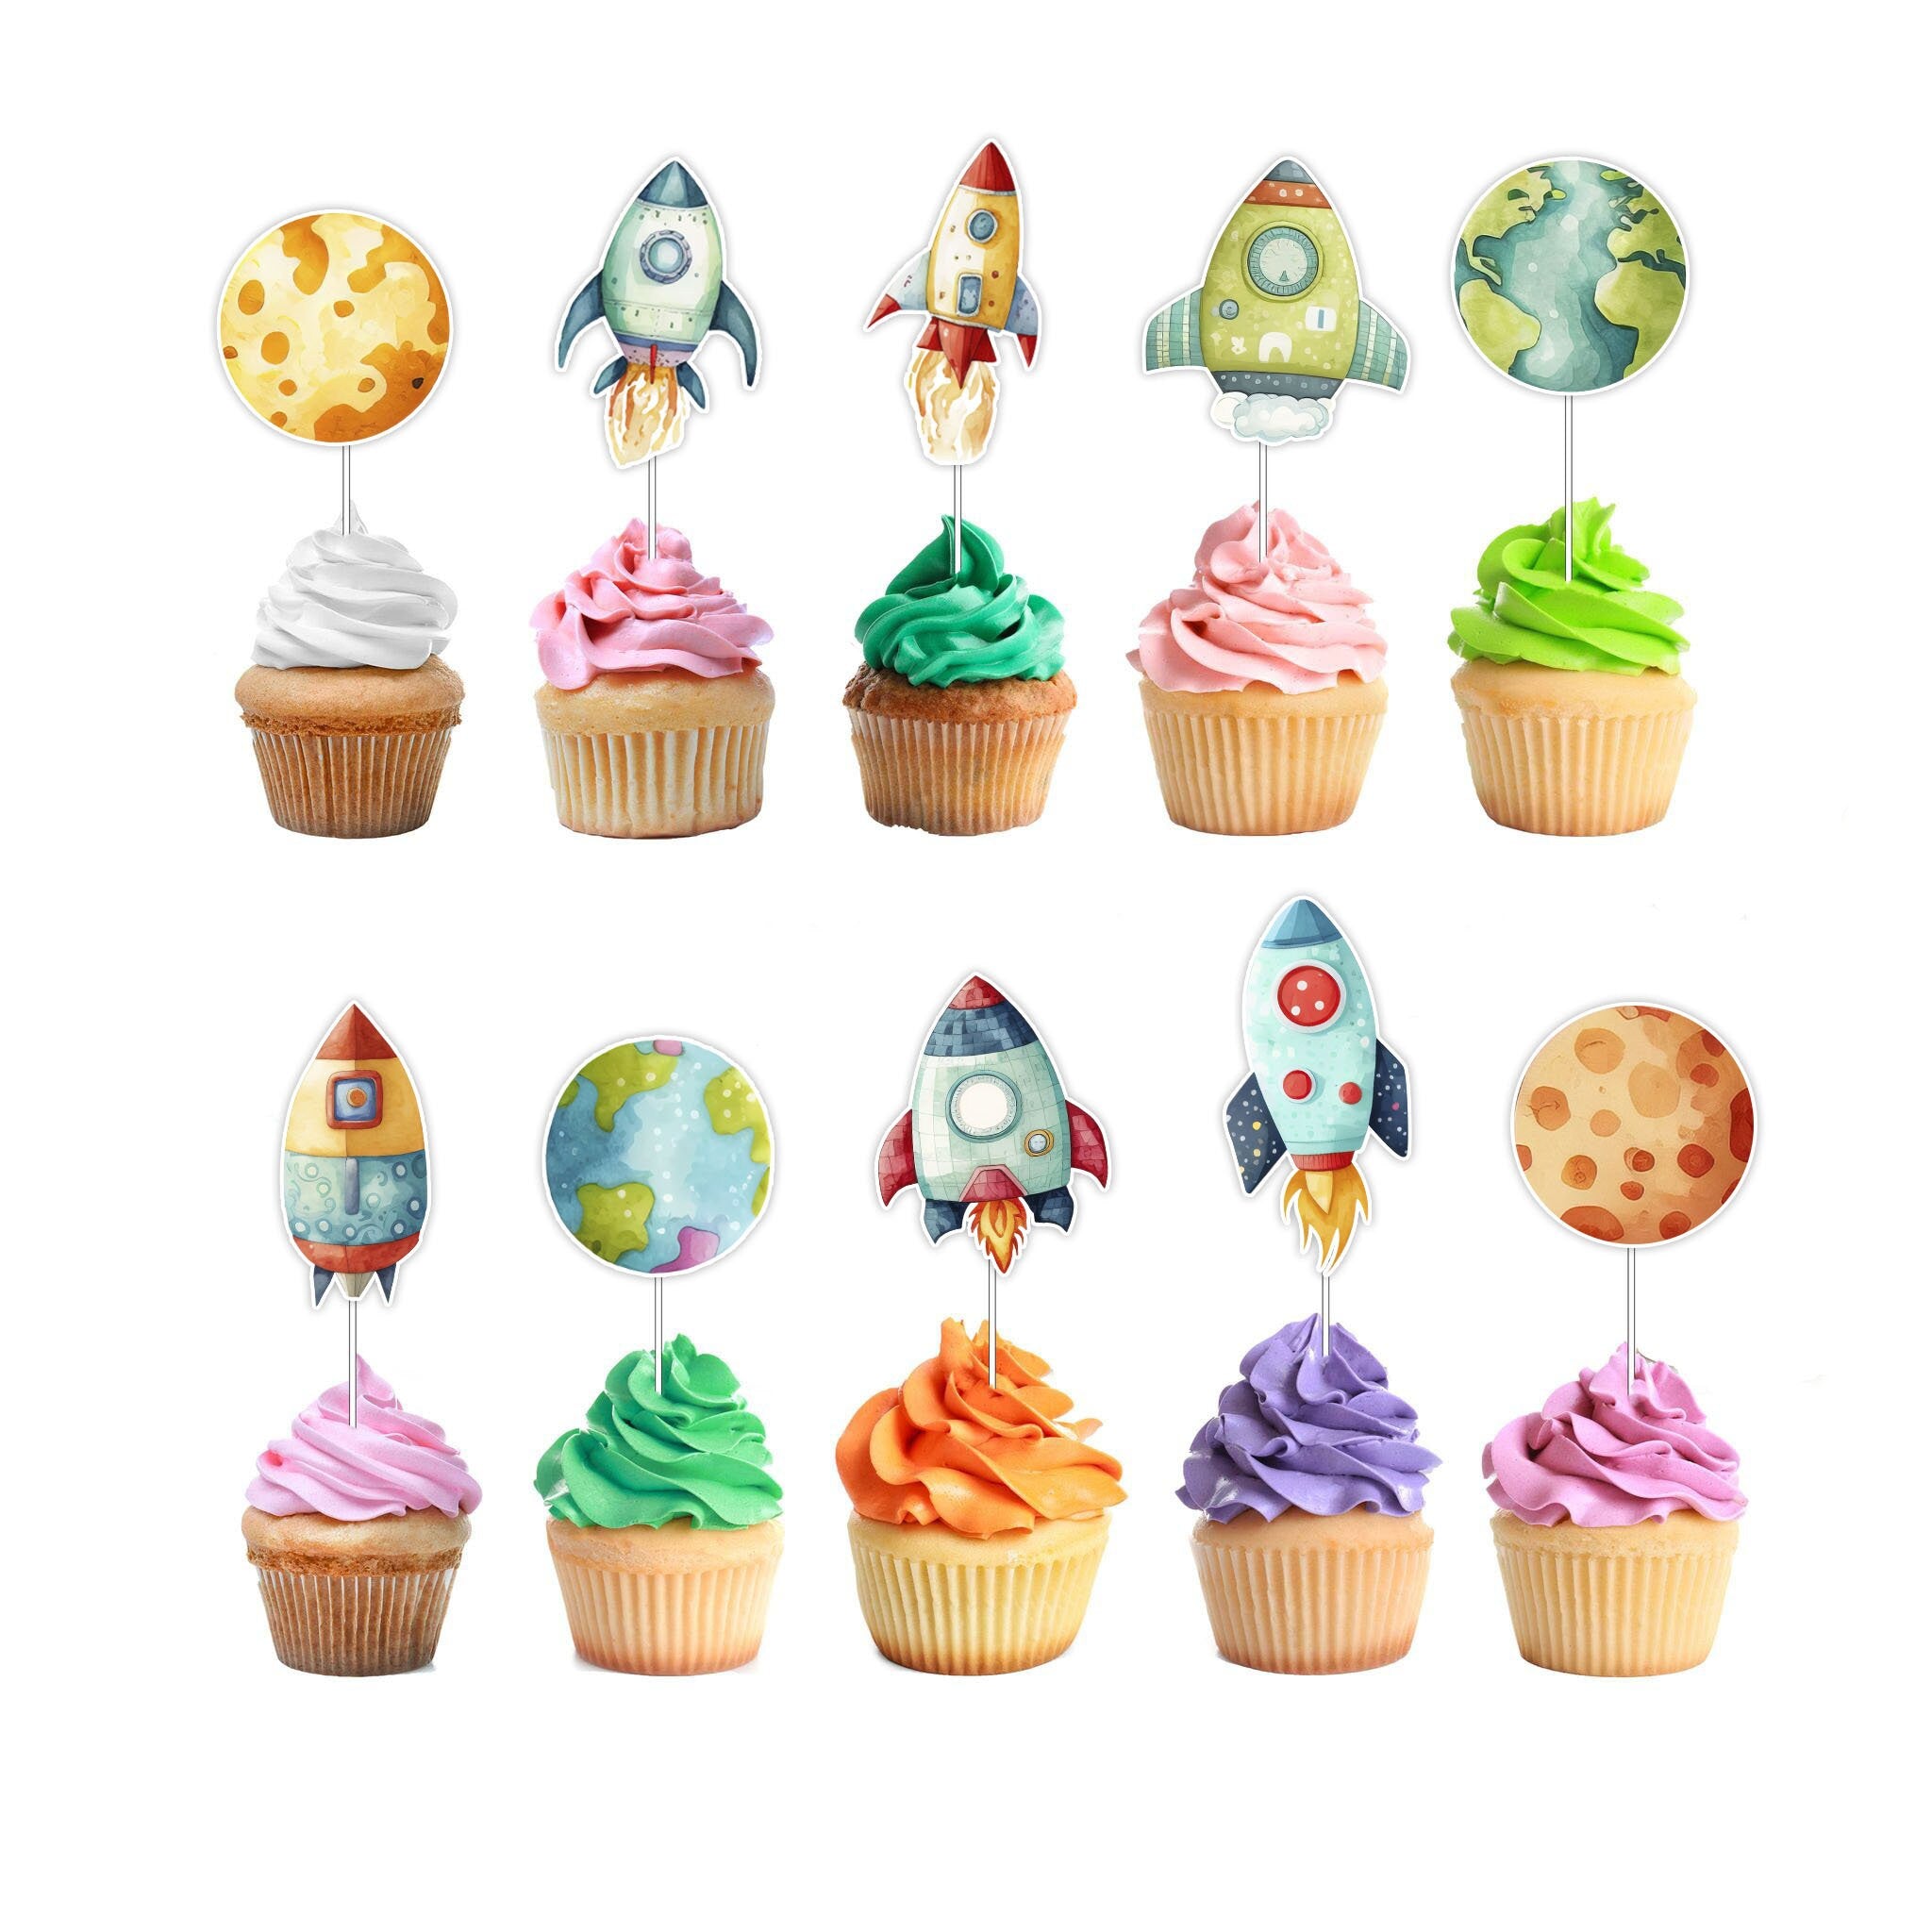 "3, 2, 1, Blast Off!" Rocket Cupcake Toppers - Out-of-this-World Decor for Cosmic Celebrations!